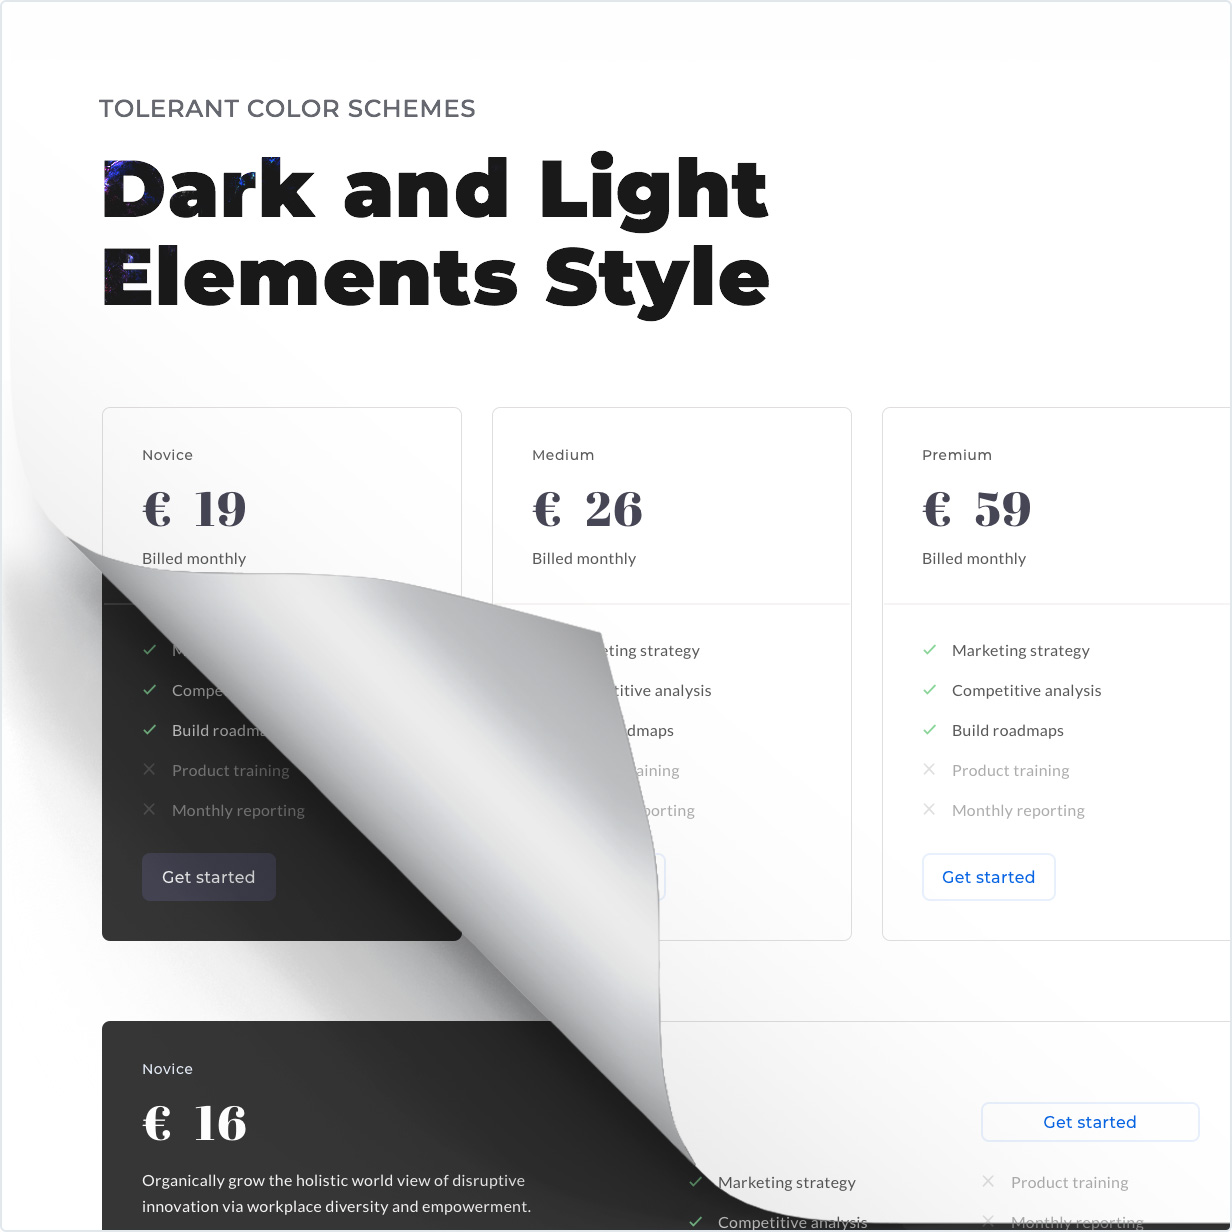 Dark and Light elements styles